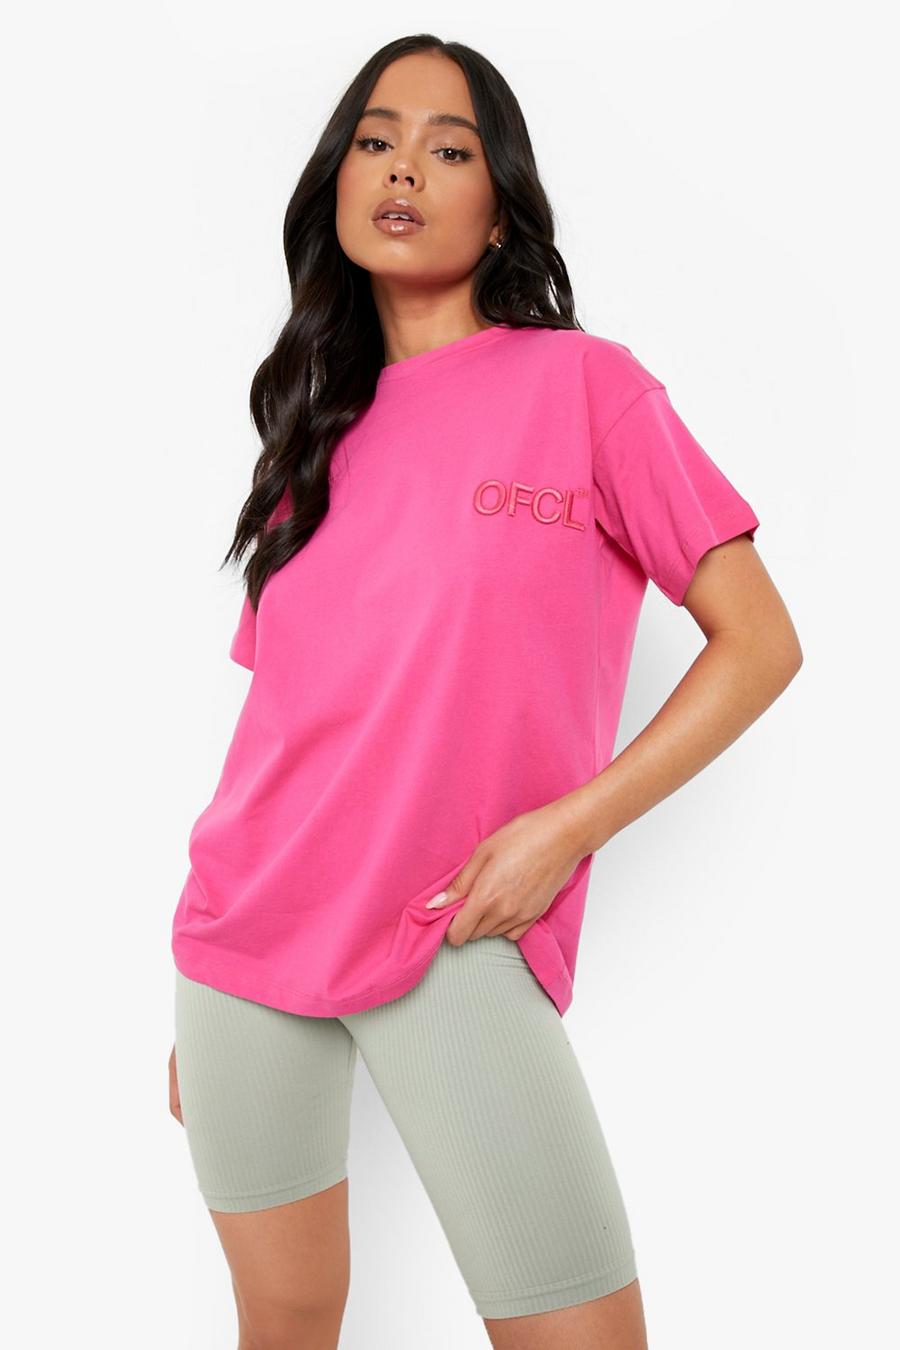 T-shirt Petite Ofcl con ricami, Hot pink rosa